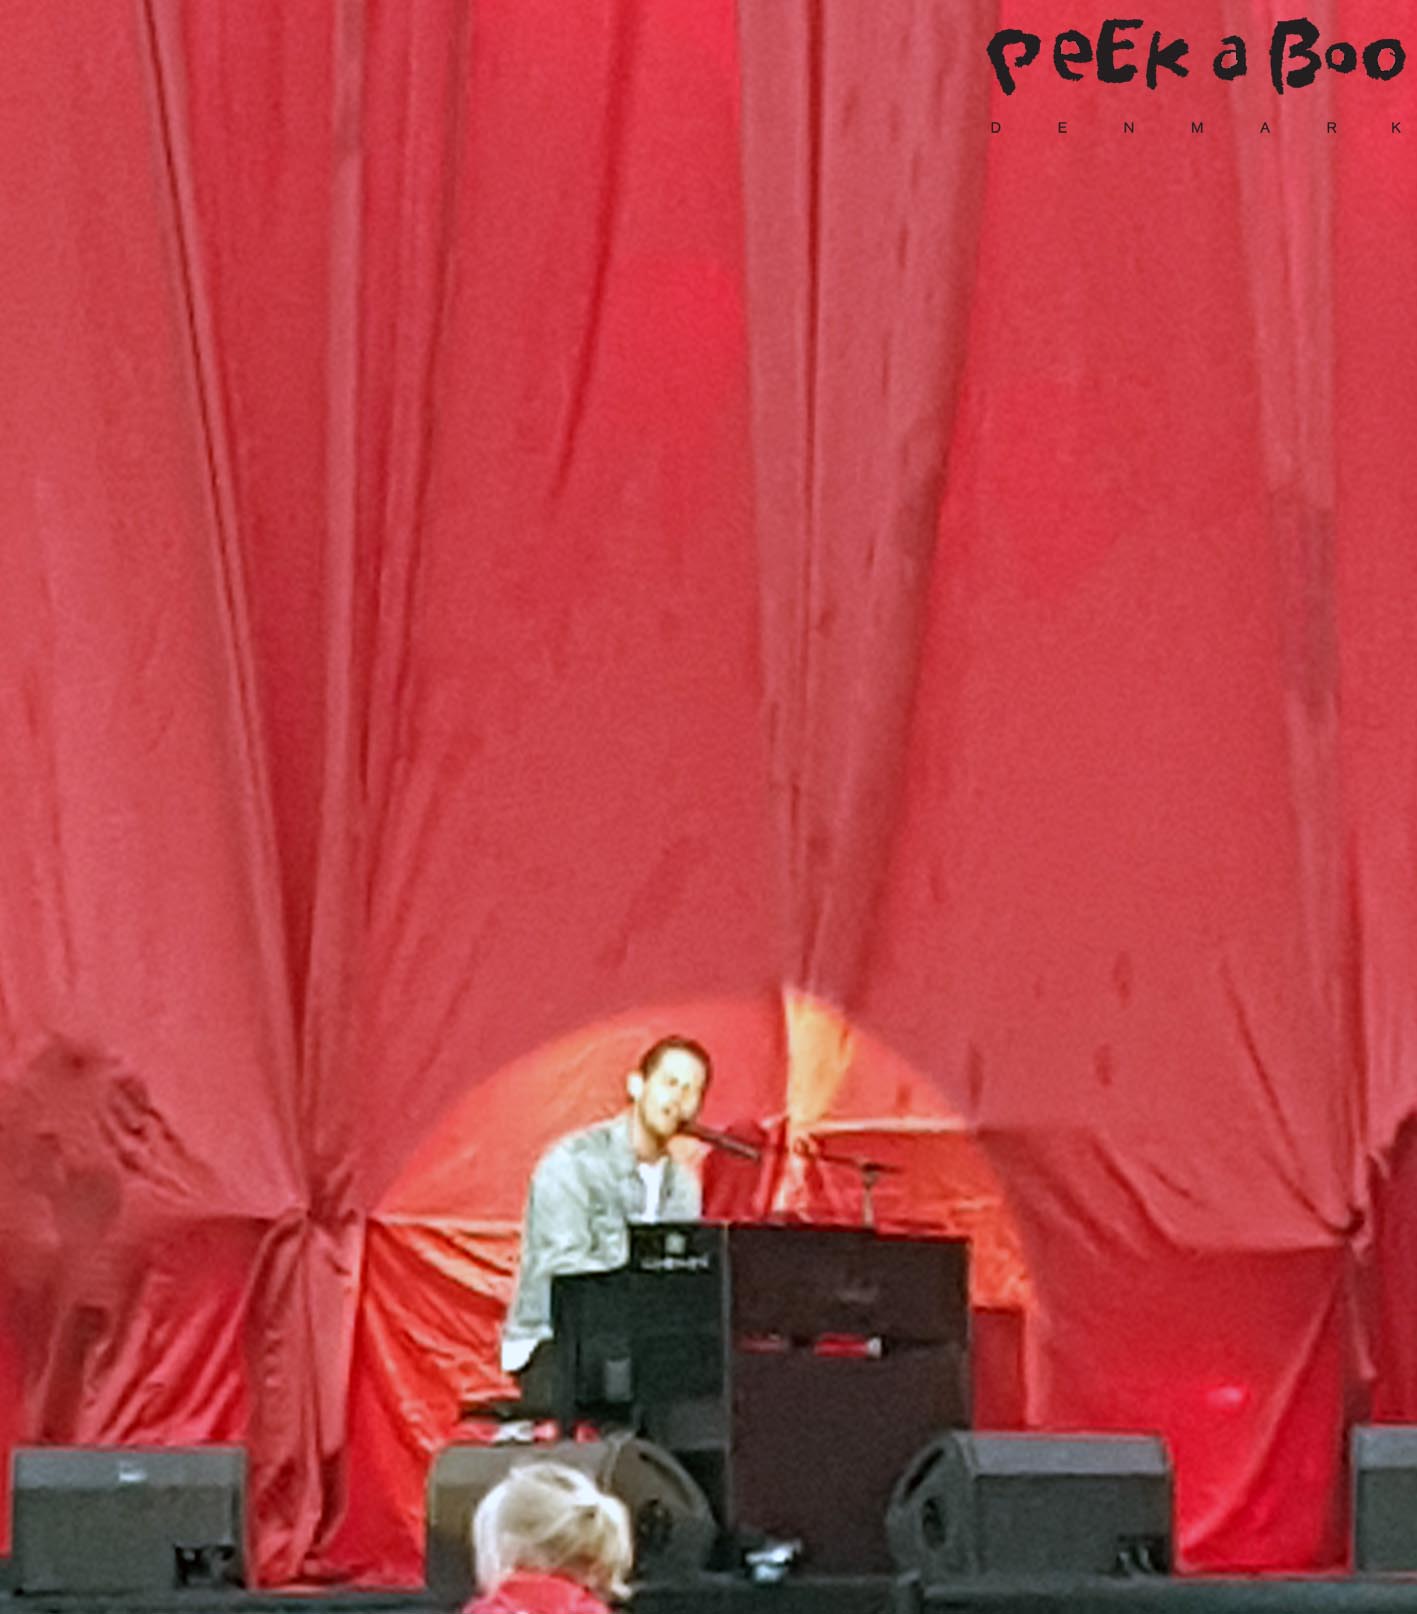 Rasmus Seebach started his concert solo with him singing and playing the piano.